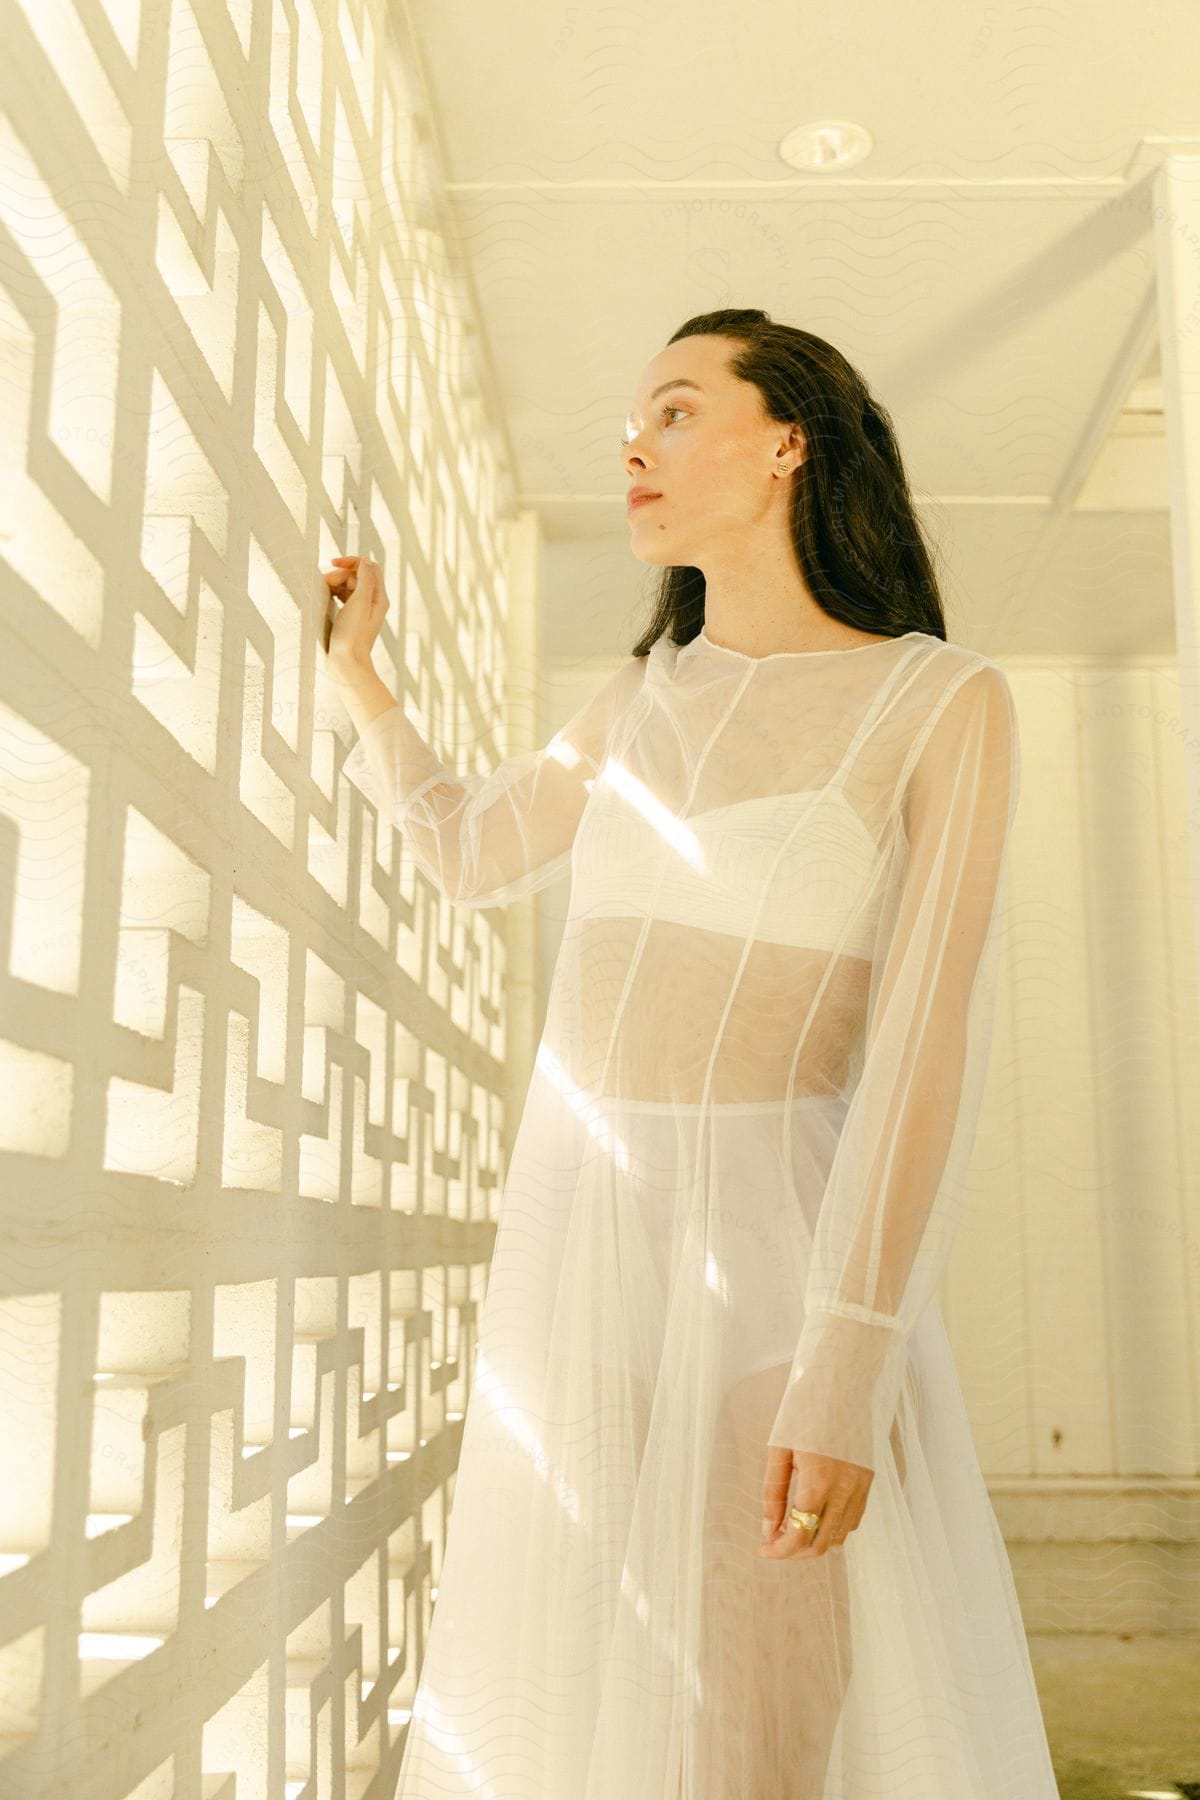 A woman wearing a sheer white gown stands near a wall as she looks out